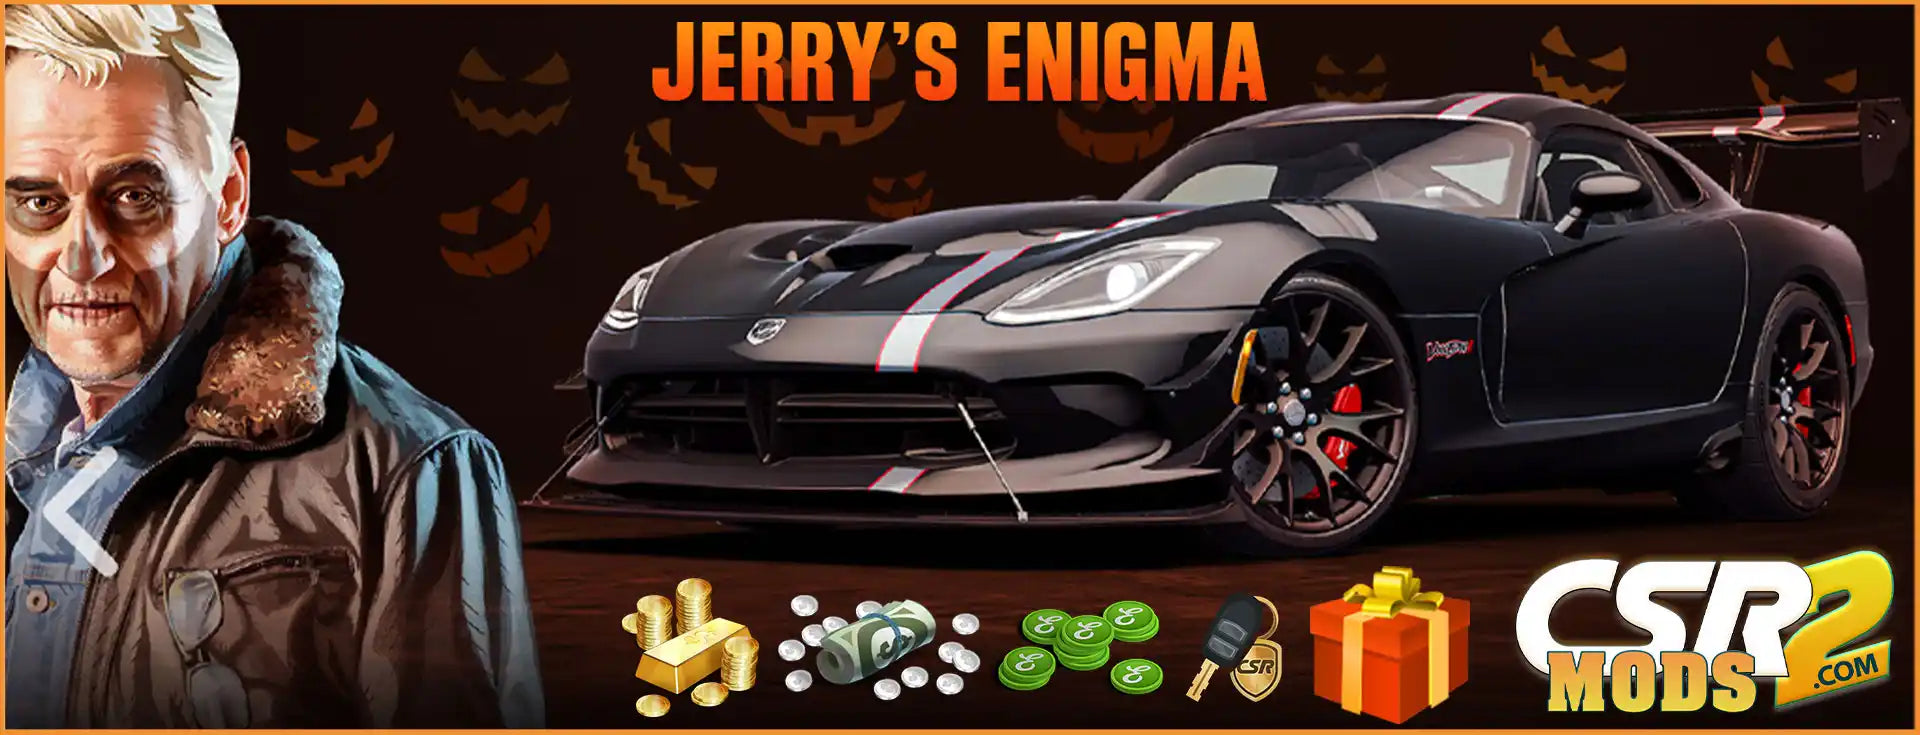 CSR2 MODS SHOP’s Guide to Dominating Jerry’s Enigma Halloween